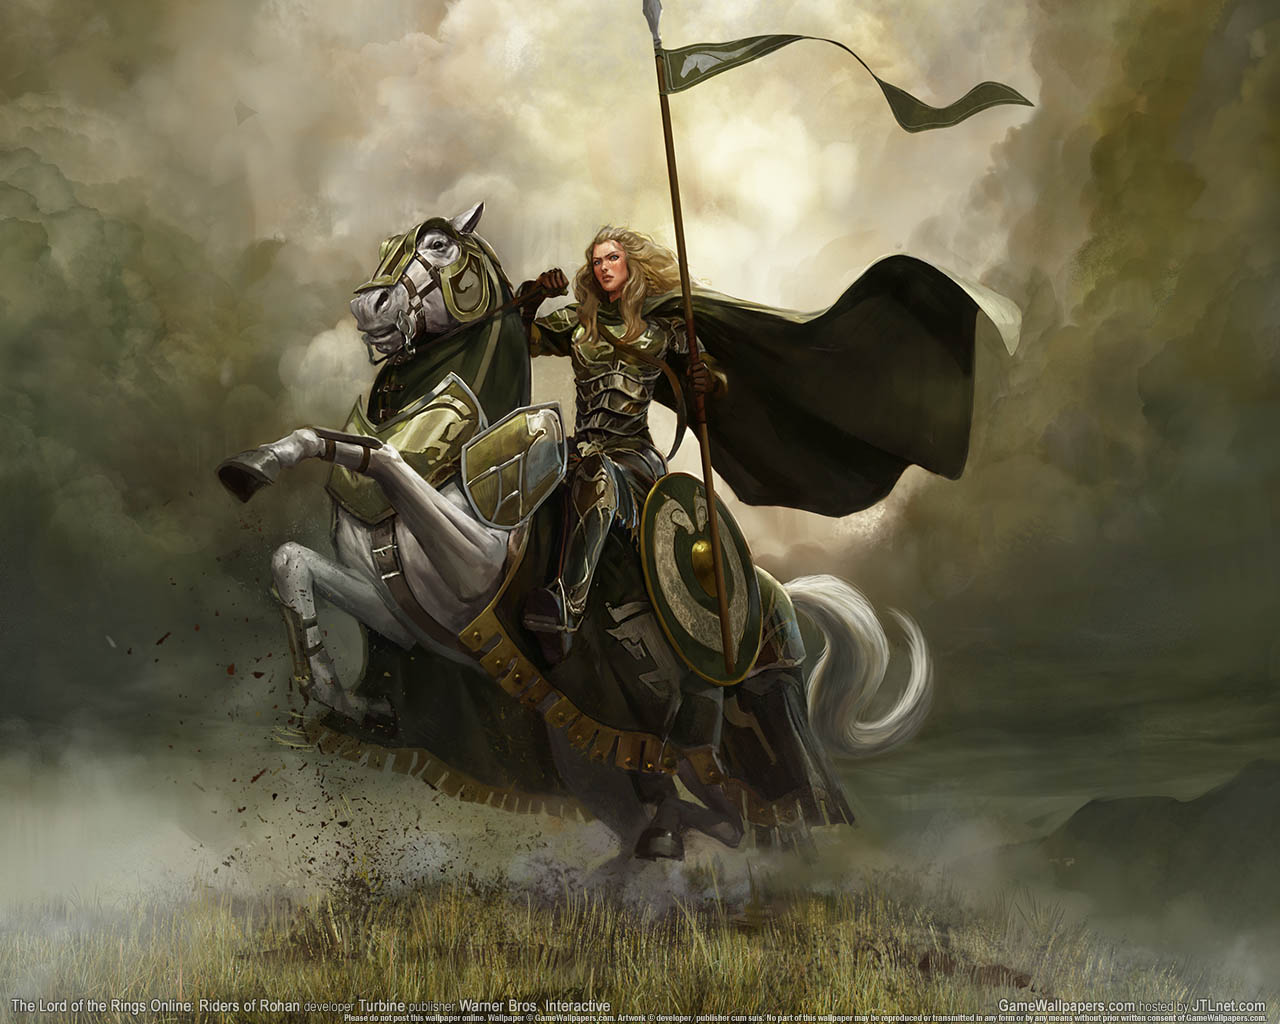 The Lord of the Rings Online: Riders of Rohan Hintergrundbild 02 1280x1024